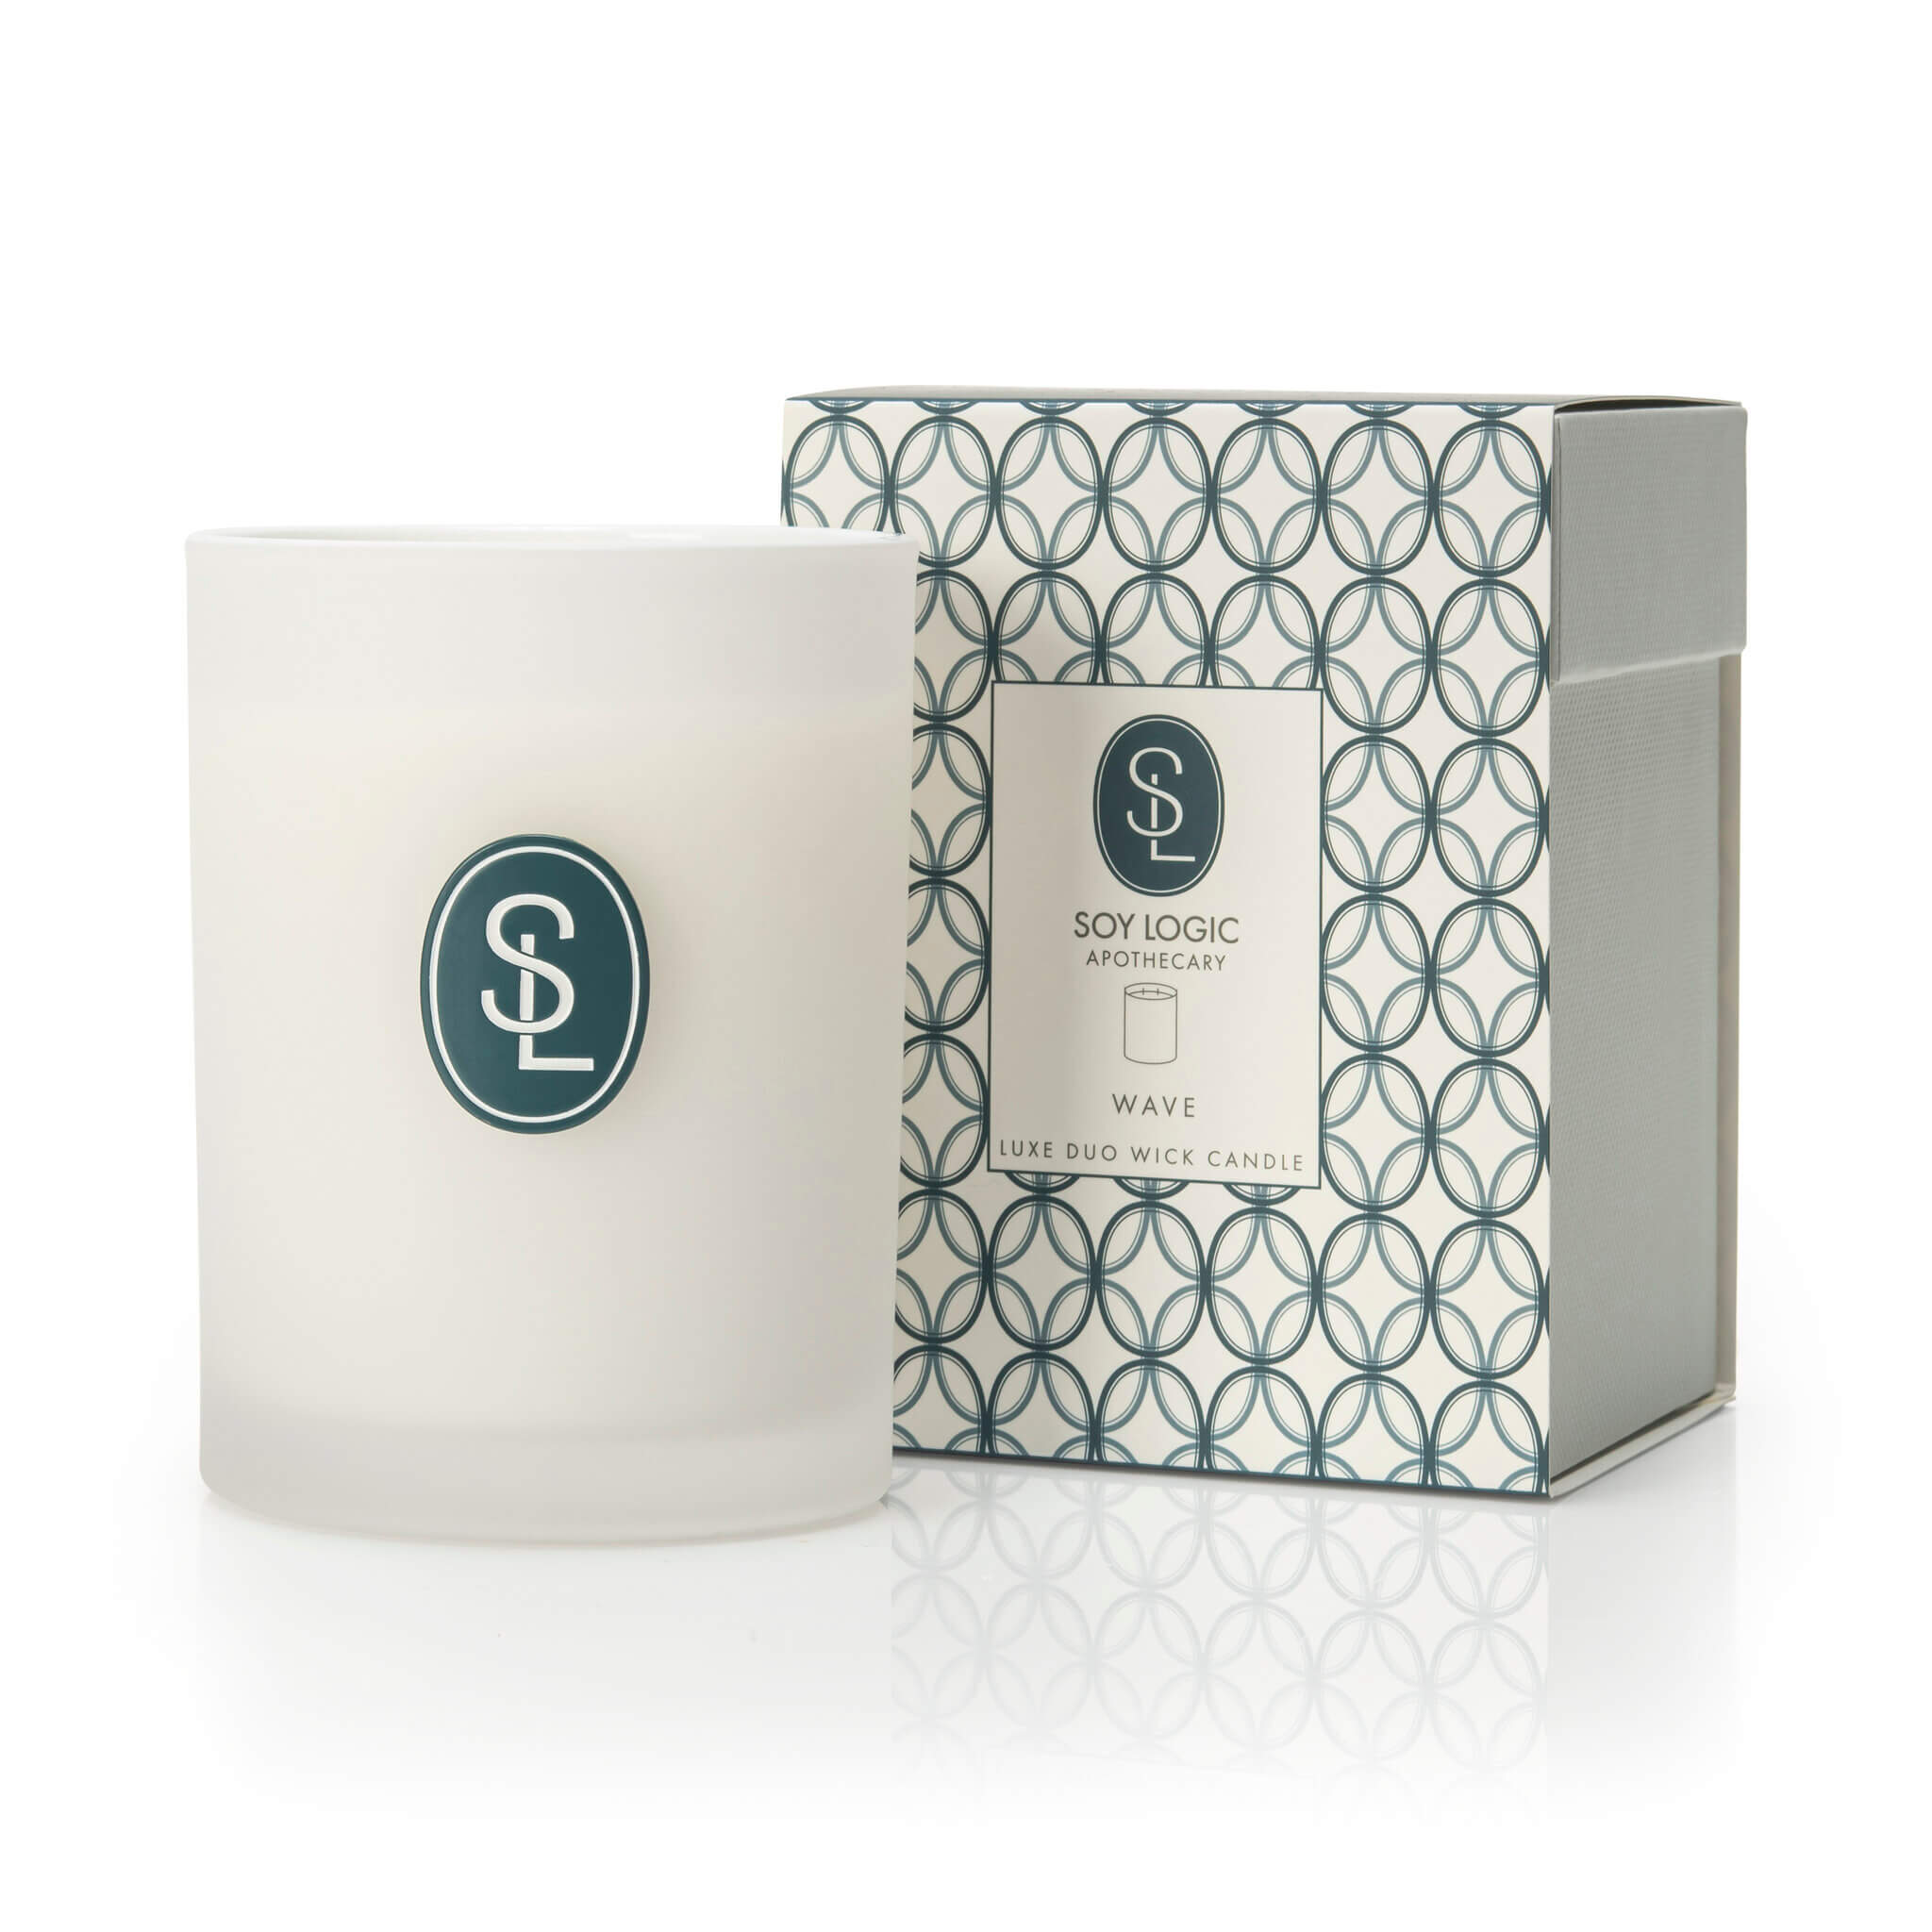 Wave Classic Duo Wick Candle